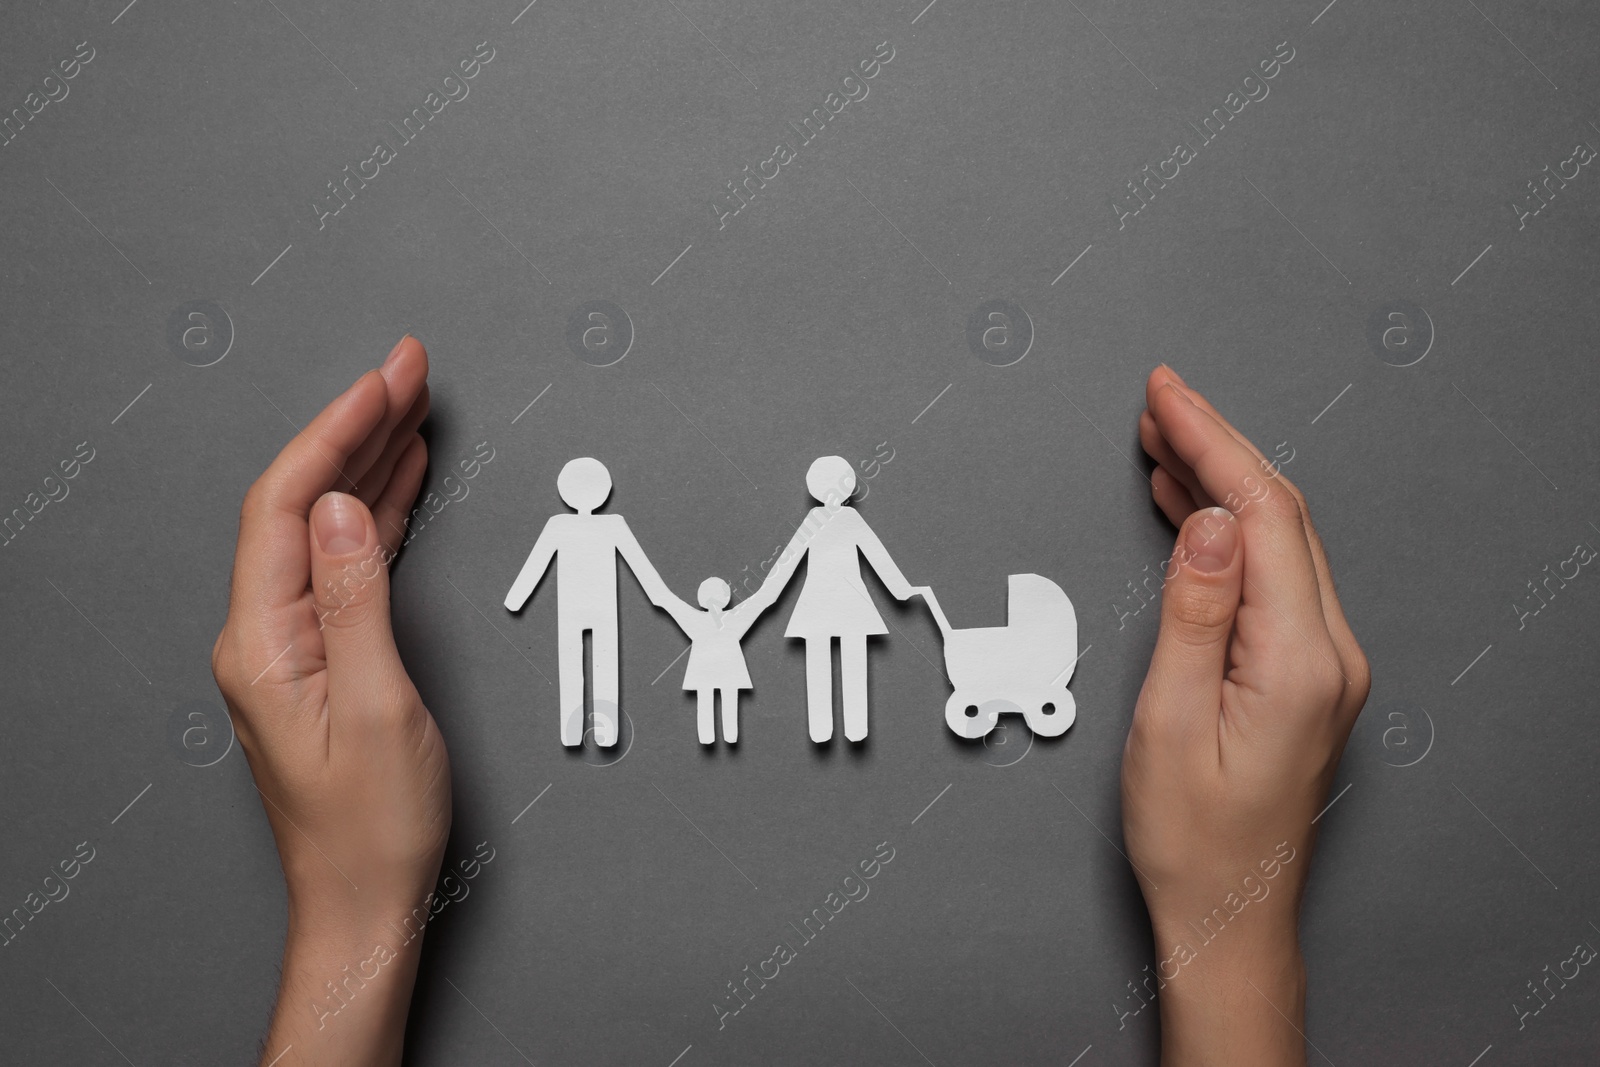 Photo of Woman protecting paper family figures on grey background, top view. Insurance concept